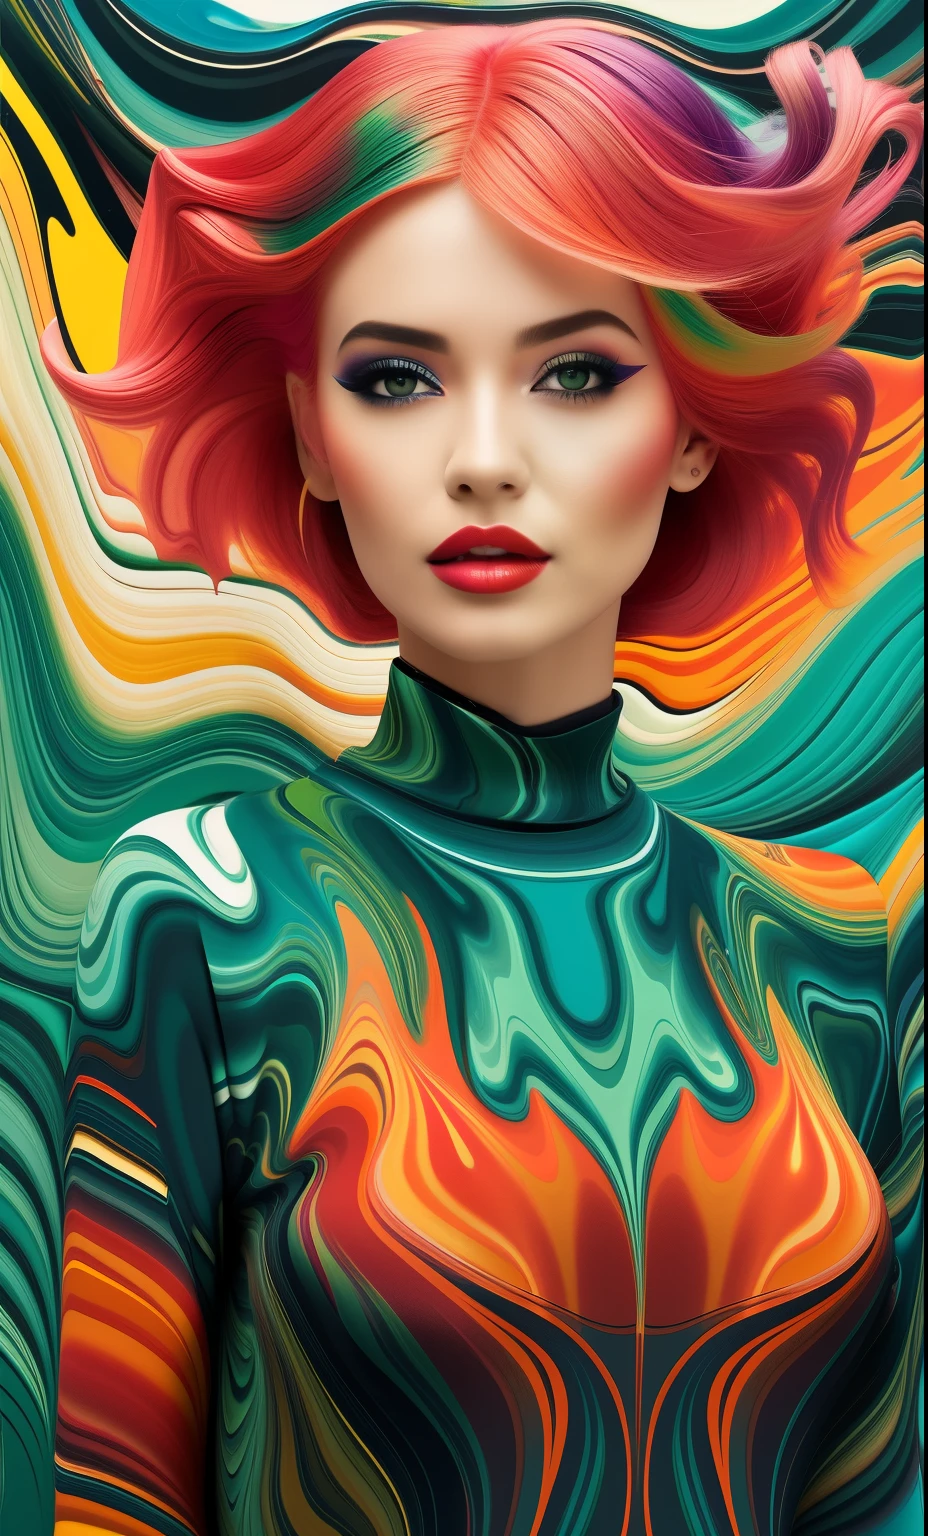 by Luis Duarte, closeup, beautiful sensual scandinavian woman in [fractal clouds jungle swamp] body suit, [Kuvshinov | van Gogh | Georges Barbier | Klimt | Geremy Mann | Giovanni Boldini | Afremov] heavy brushstrokes stained impasto oil, orange, cream, blue, fuchsia, bright green, vivid gradient colors 2d 3d relief tesselation mixed media vector fluid textured, Dark Influence, NijiExpress 3D v2, Oil painting, Ink v3, Splash style, Abstract Art,3D, High definition, Photo realistic, specified, Epic style, Illustrated v3, Deco Influence, Air Brush style, drawing, Niji Art